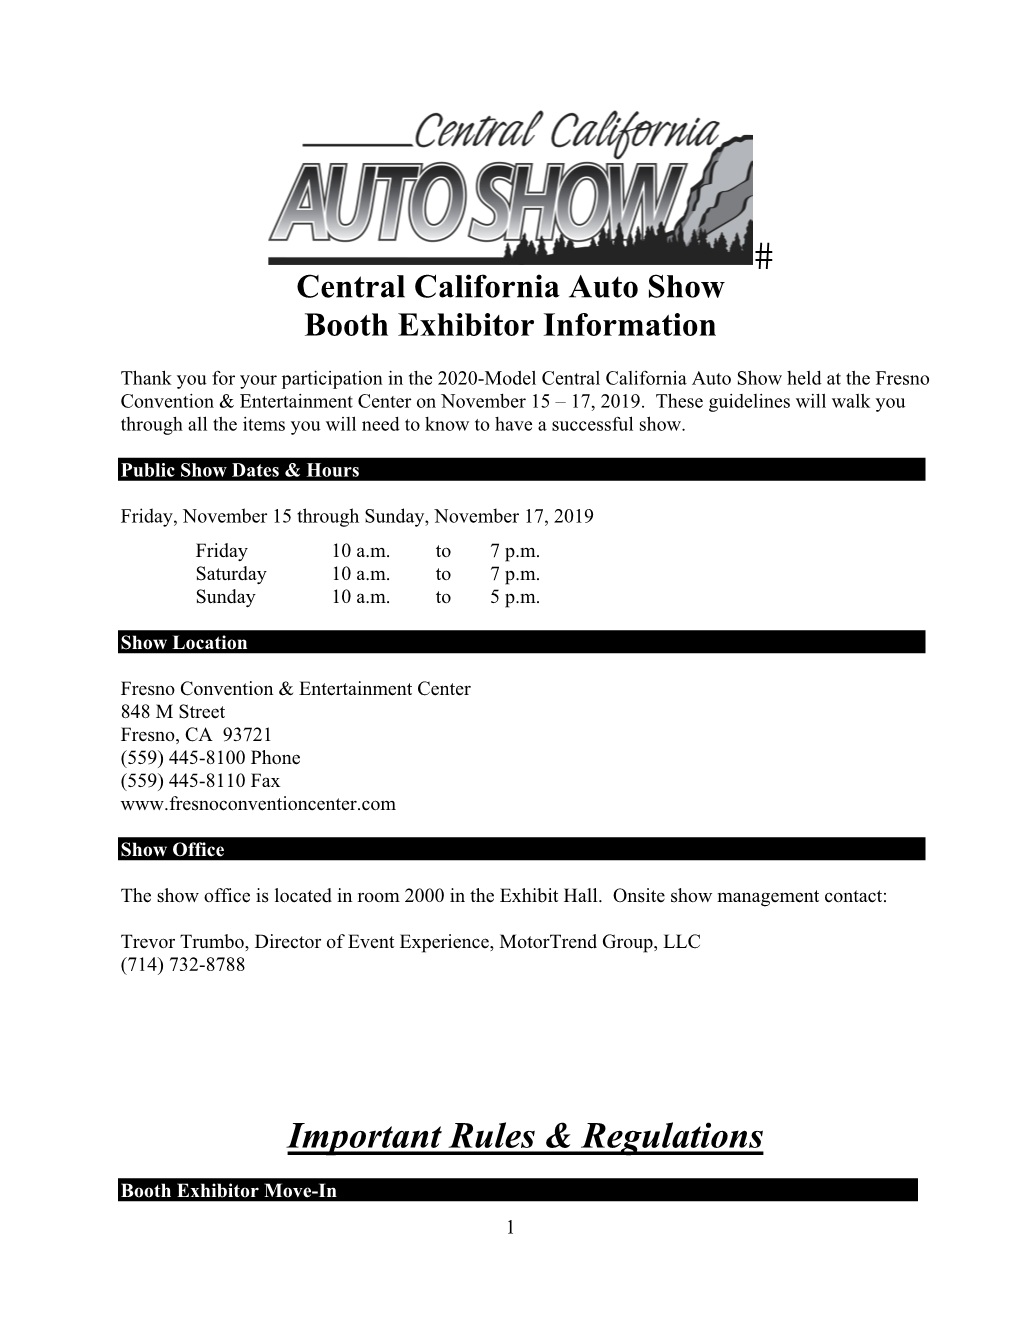 Booth Manual 10/15/19